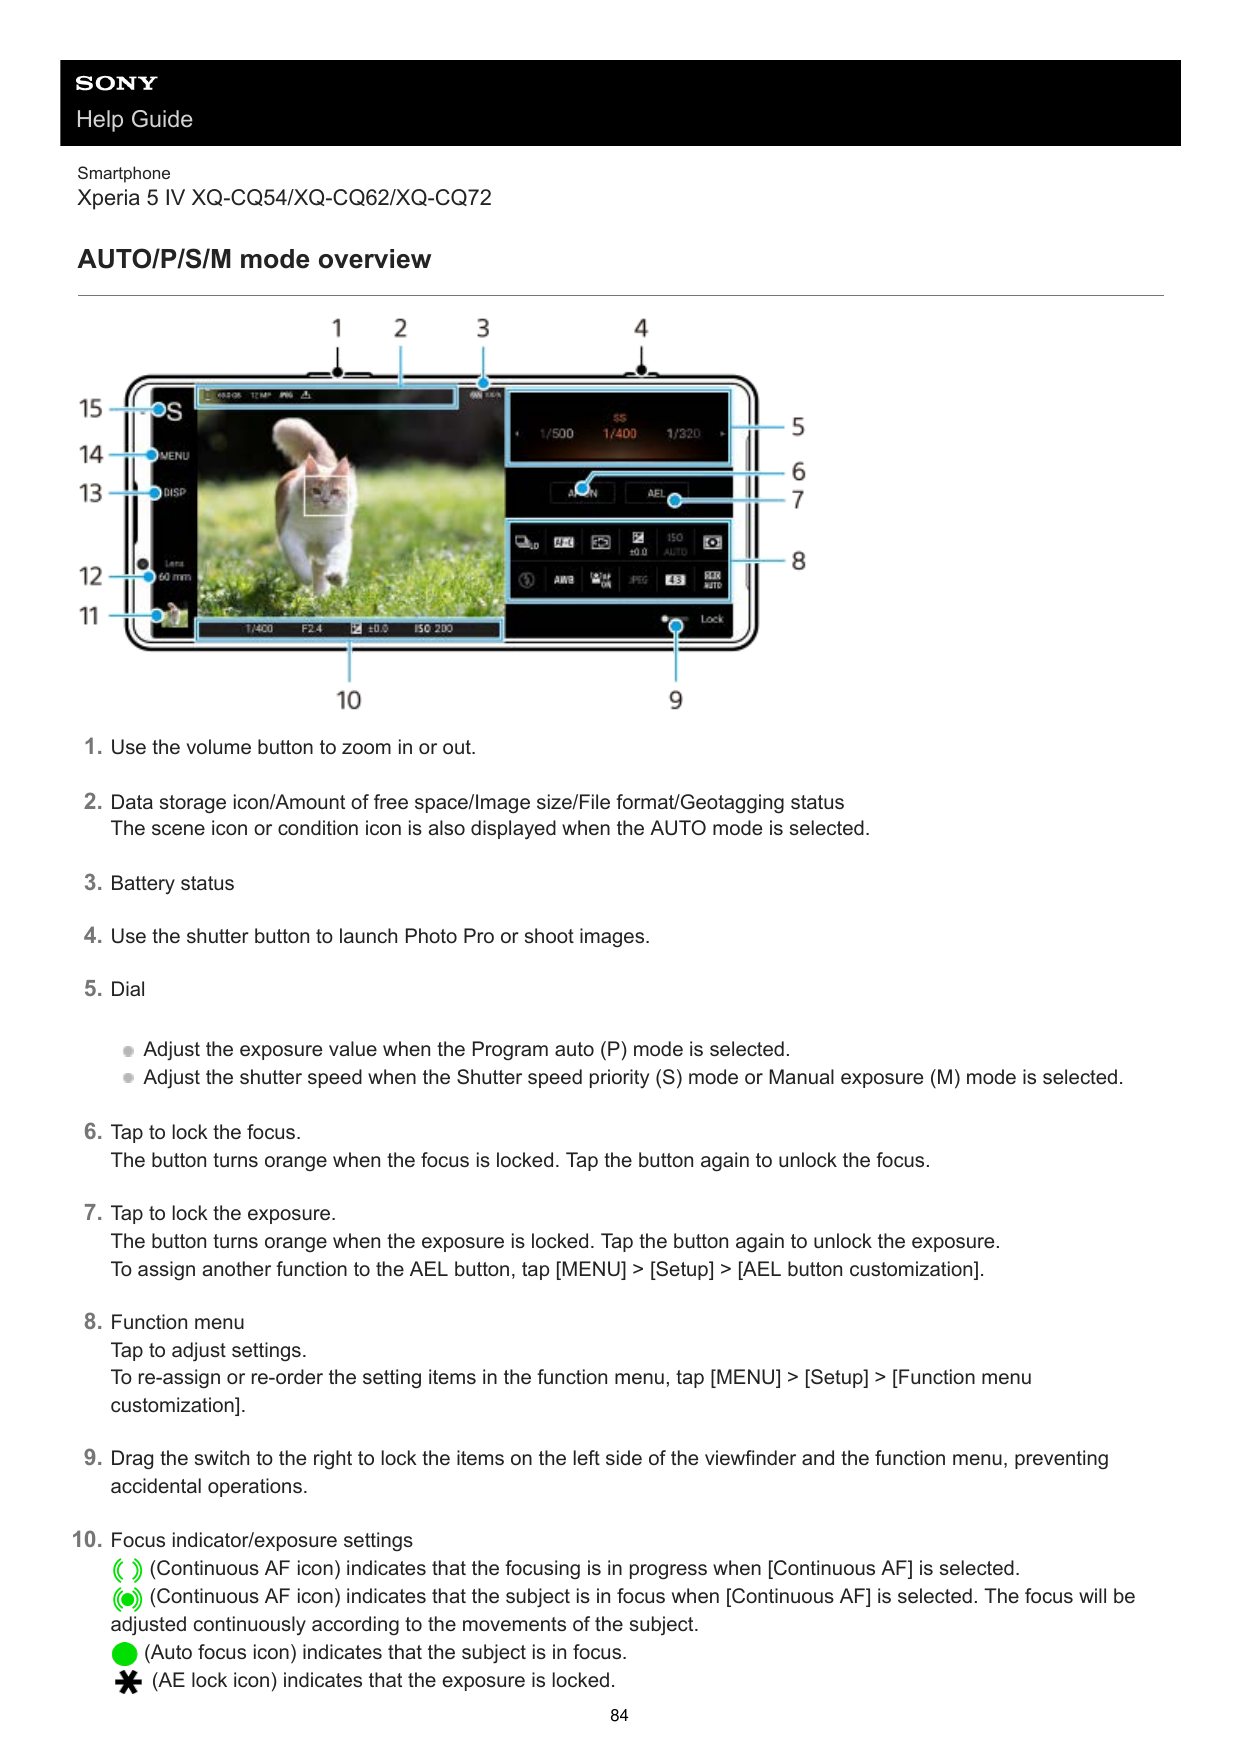 Help GuideSmartphoneXperia 5 IV XQ-CQ54/XQ-CQ62/XQ-CQ72AUTO/P/S/M mode overview1. Use the volume button to zoom in or out.2. Dat